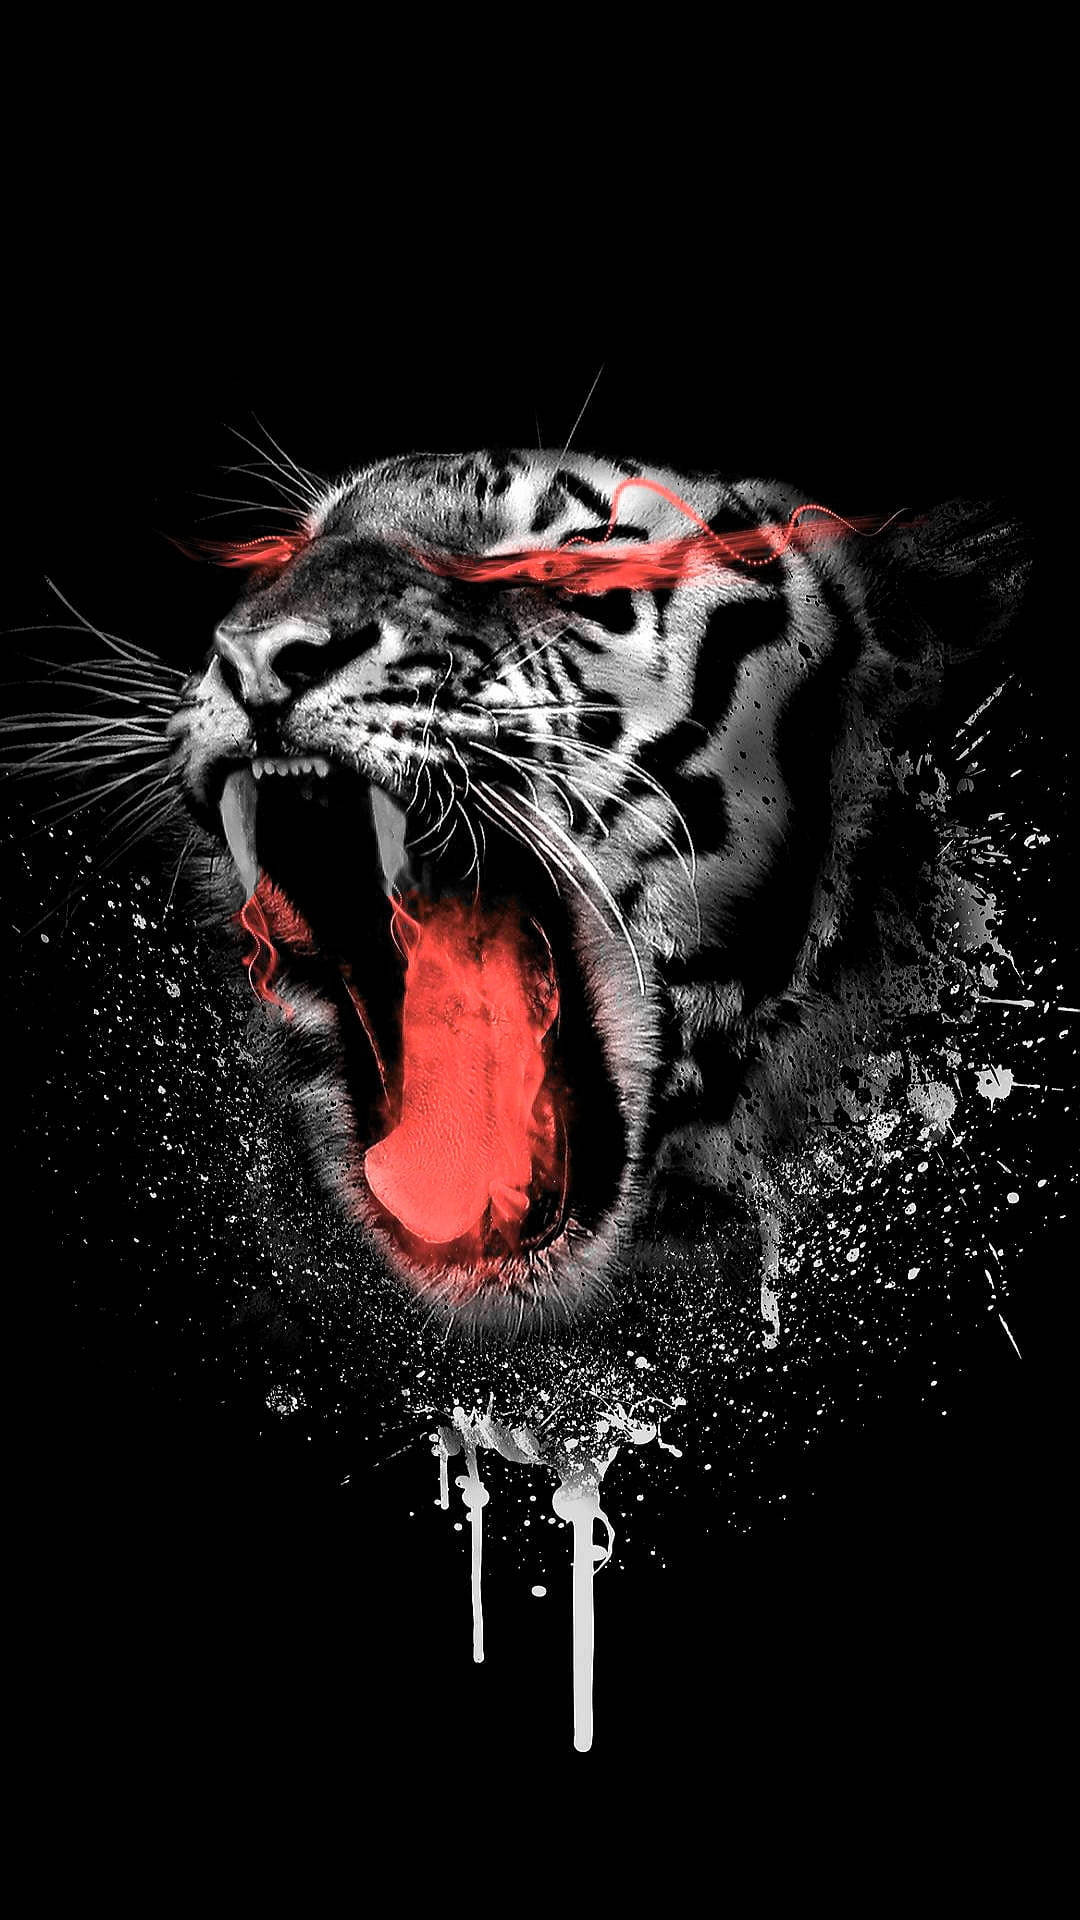 Black Tiger With Red Eyes Wallpaper